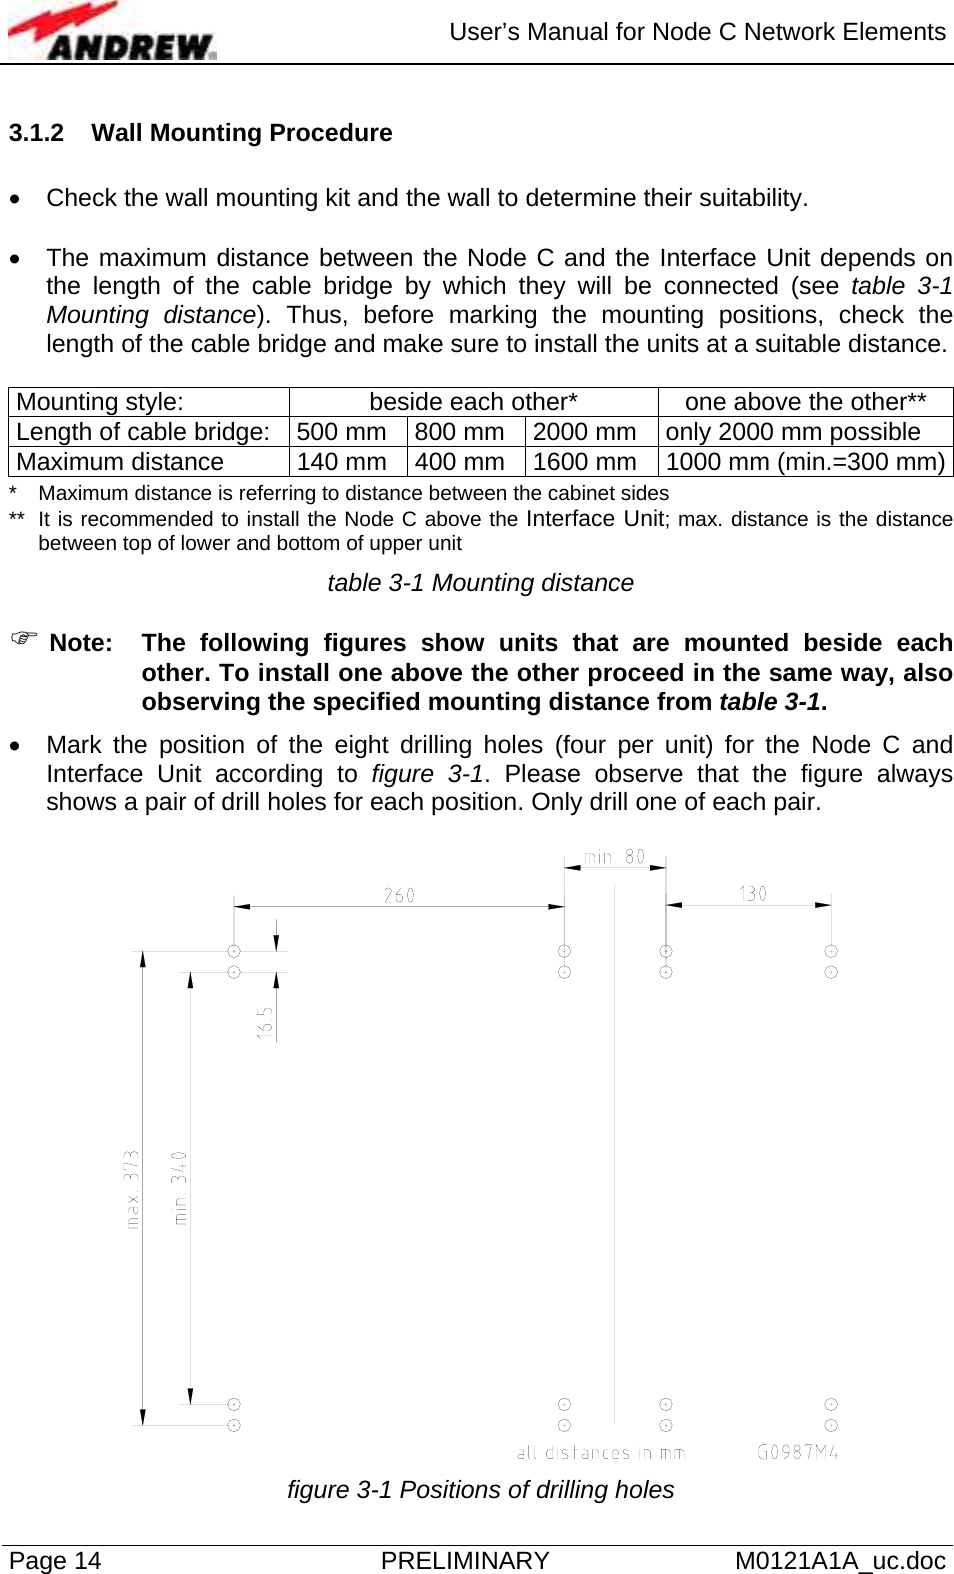  User’s Manual for Node C Network Elements Page 14  PRELIMINARY M0121A1A_uc.doc 3.1.2  Wall Mounting Procedure   •  Check the wall mounting kit and the wall to determine their suitability.  •  The maximum distance between the Node C and the Interface Unit depends on the length of the cable bridge by which they will be connected (see table 3-1 Mounting distance). Thus, before marking the mounting positions, check the length of the cable bridge and make sure to install the units at a suitable distance.  Mounting style:  beside each other*  one above the other** Length of cable bridge:  500 mm  800 mm  2000 mm  only 2000 mm possible Maximum distance  140 mm  400 mm  1600 mm  1000 mm (min.=300 mm)*   Maximum distance is referring to distance between the cabinet sides **  It is recommended to install the Node C above the Interface Unit; max. distance is the distance between top of lower and bottom of upper unit  table 3-1 Mounting distance  ) Note:  The following figures show units that are mounted beside each other. To install one above the other proceed in the same way, also observing the specified mounting distance from table 3-1. •  Mark the position of the eight drilling holes (four per unit) for the Node C and Interface Unit according to figure 3-1. Please observe that the figure always shows a pair of drill holes for each position. Only drill one of each pair.    figure 3-1 Positions of drilling holes 